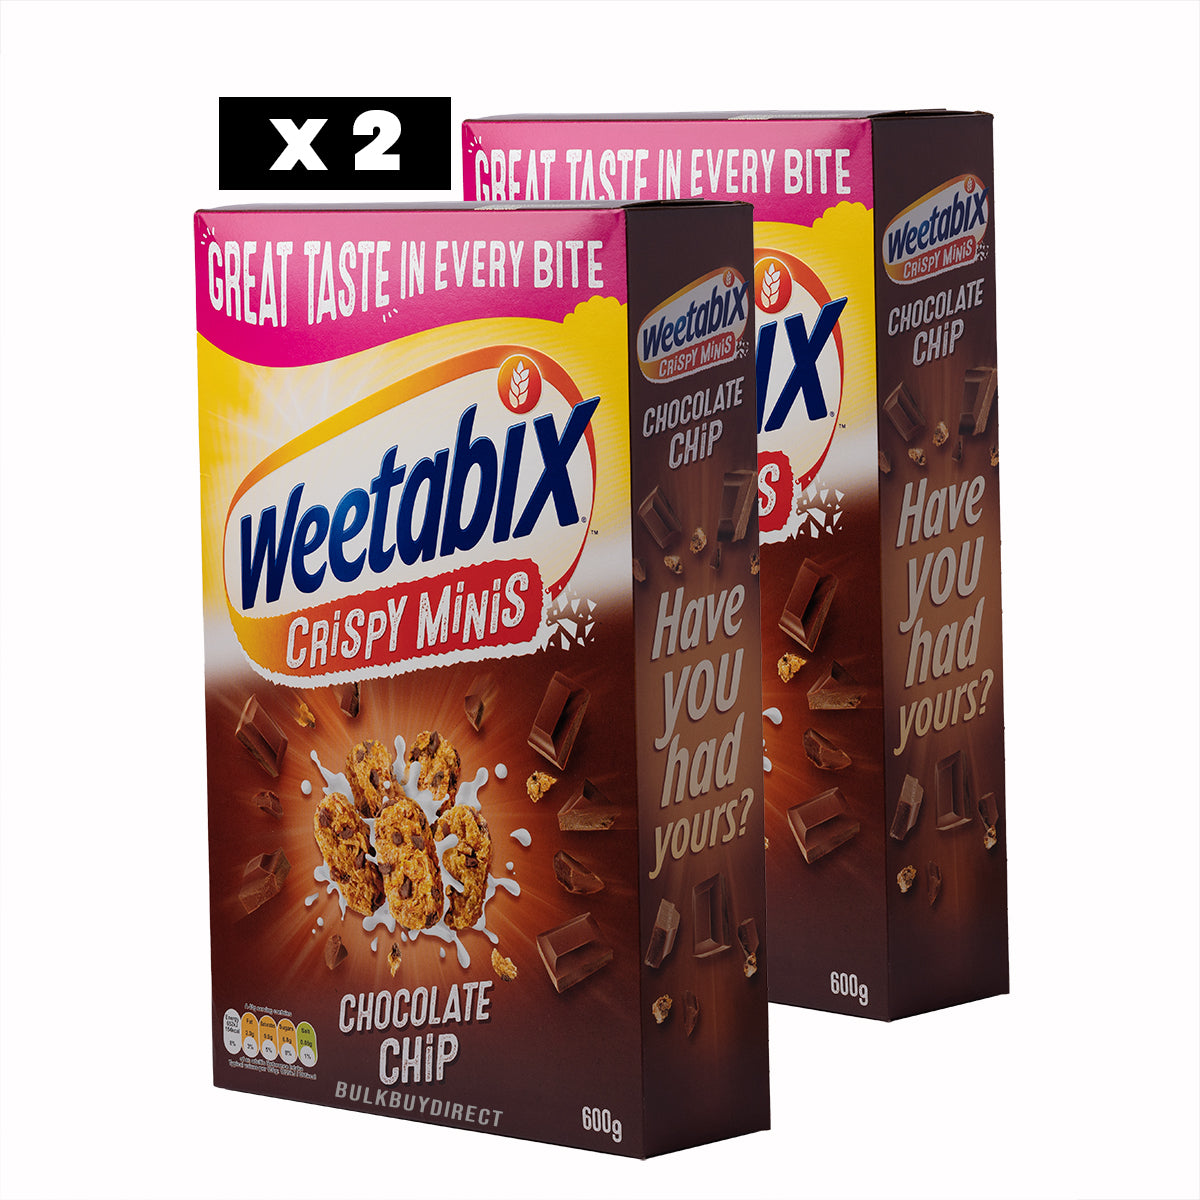 Weetabix Crispy Minis 2x600g: Crunchy and Wholesome Breakfast Delight